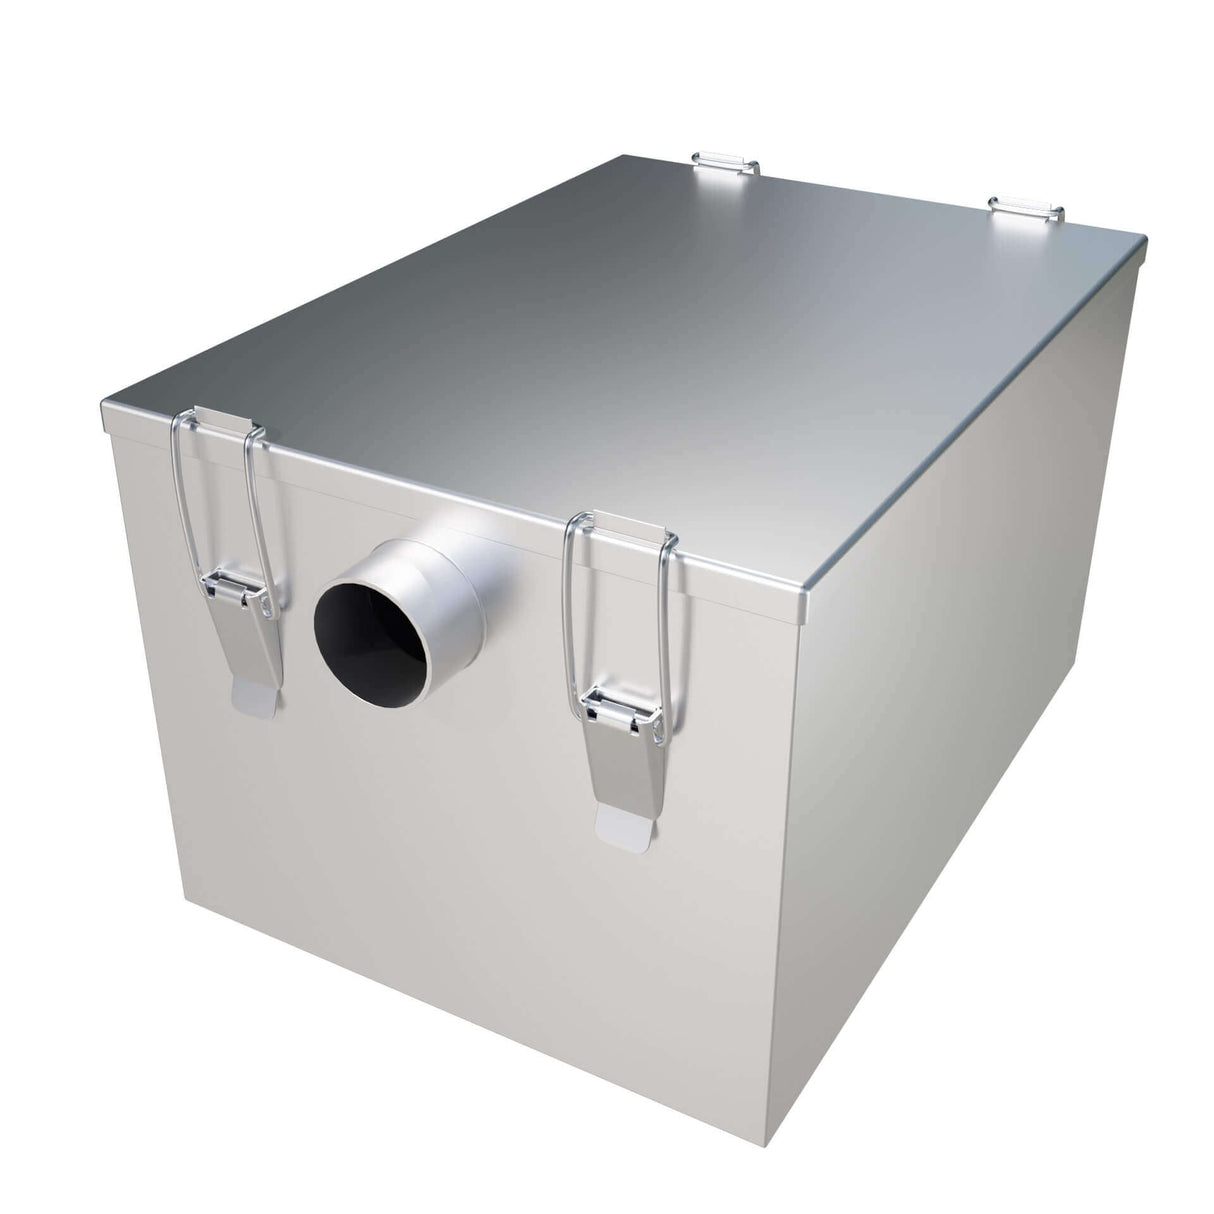 Stainless Steel Domestic Grease Trap 16 Litre Capacity - 5KGB-SS